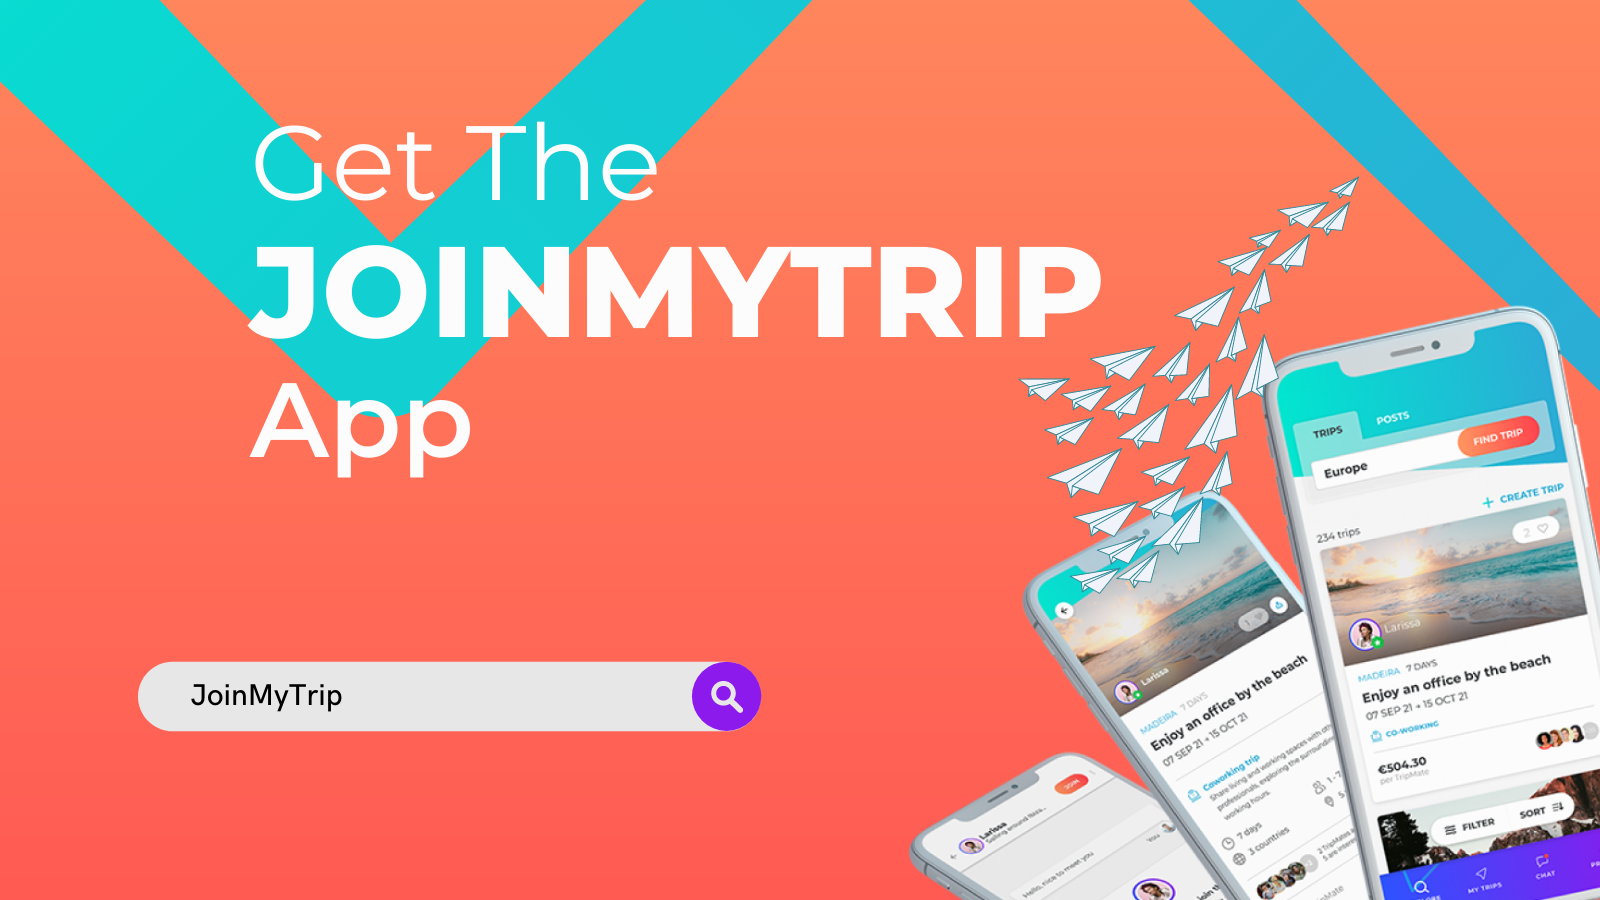 The Benefits of the JoinMyTrip App